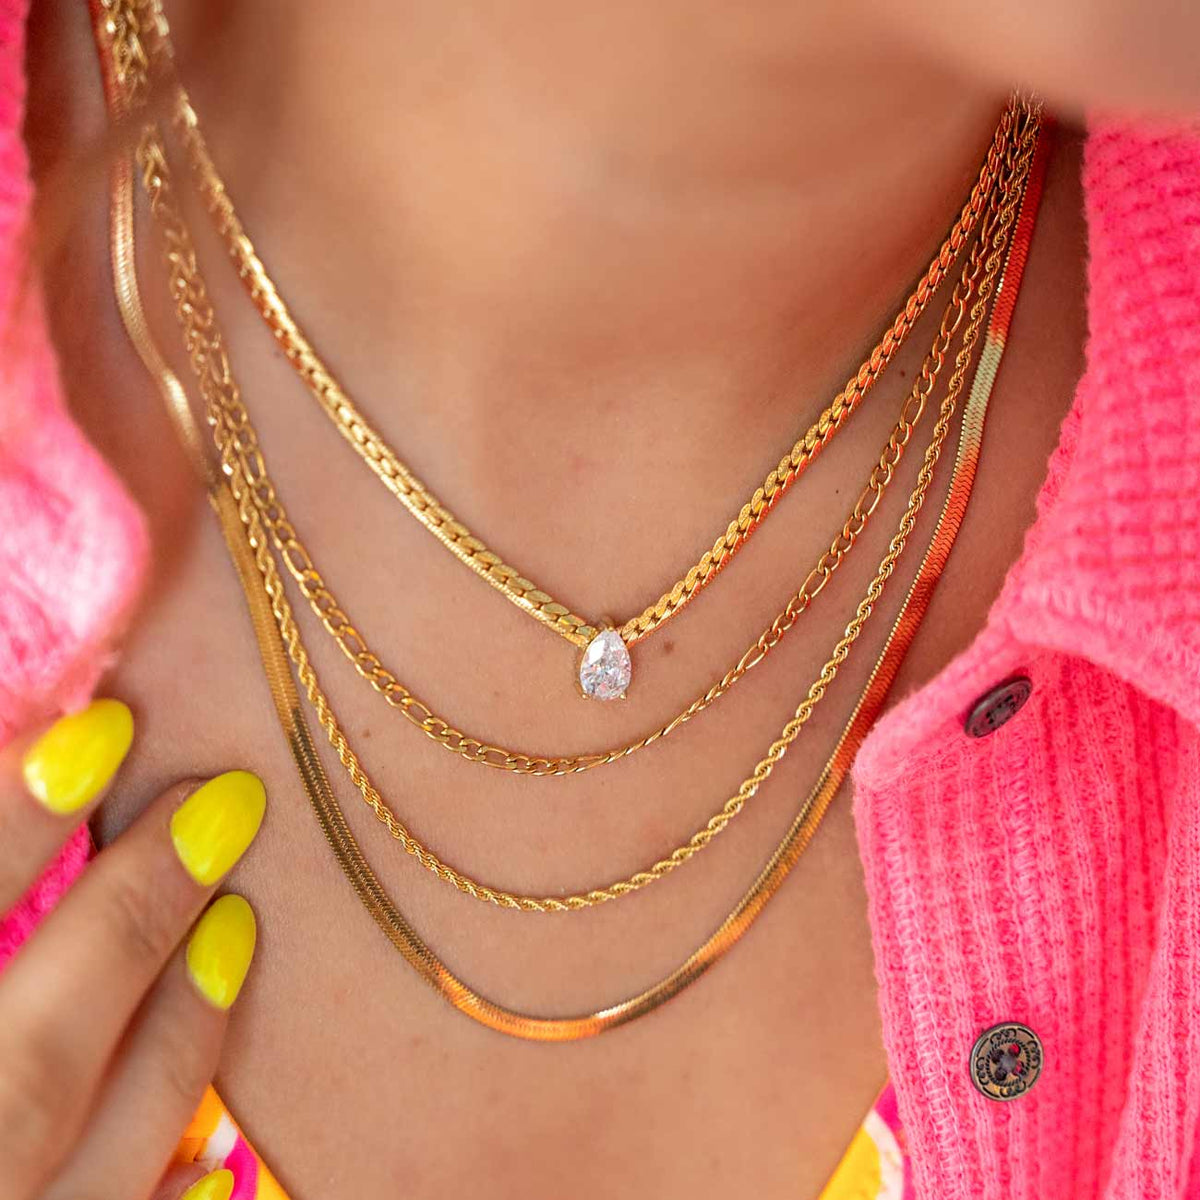 3-Necklace Layering Extension Chain